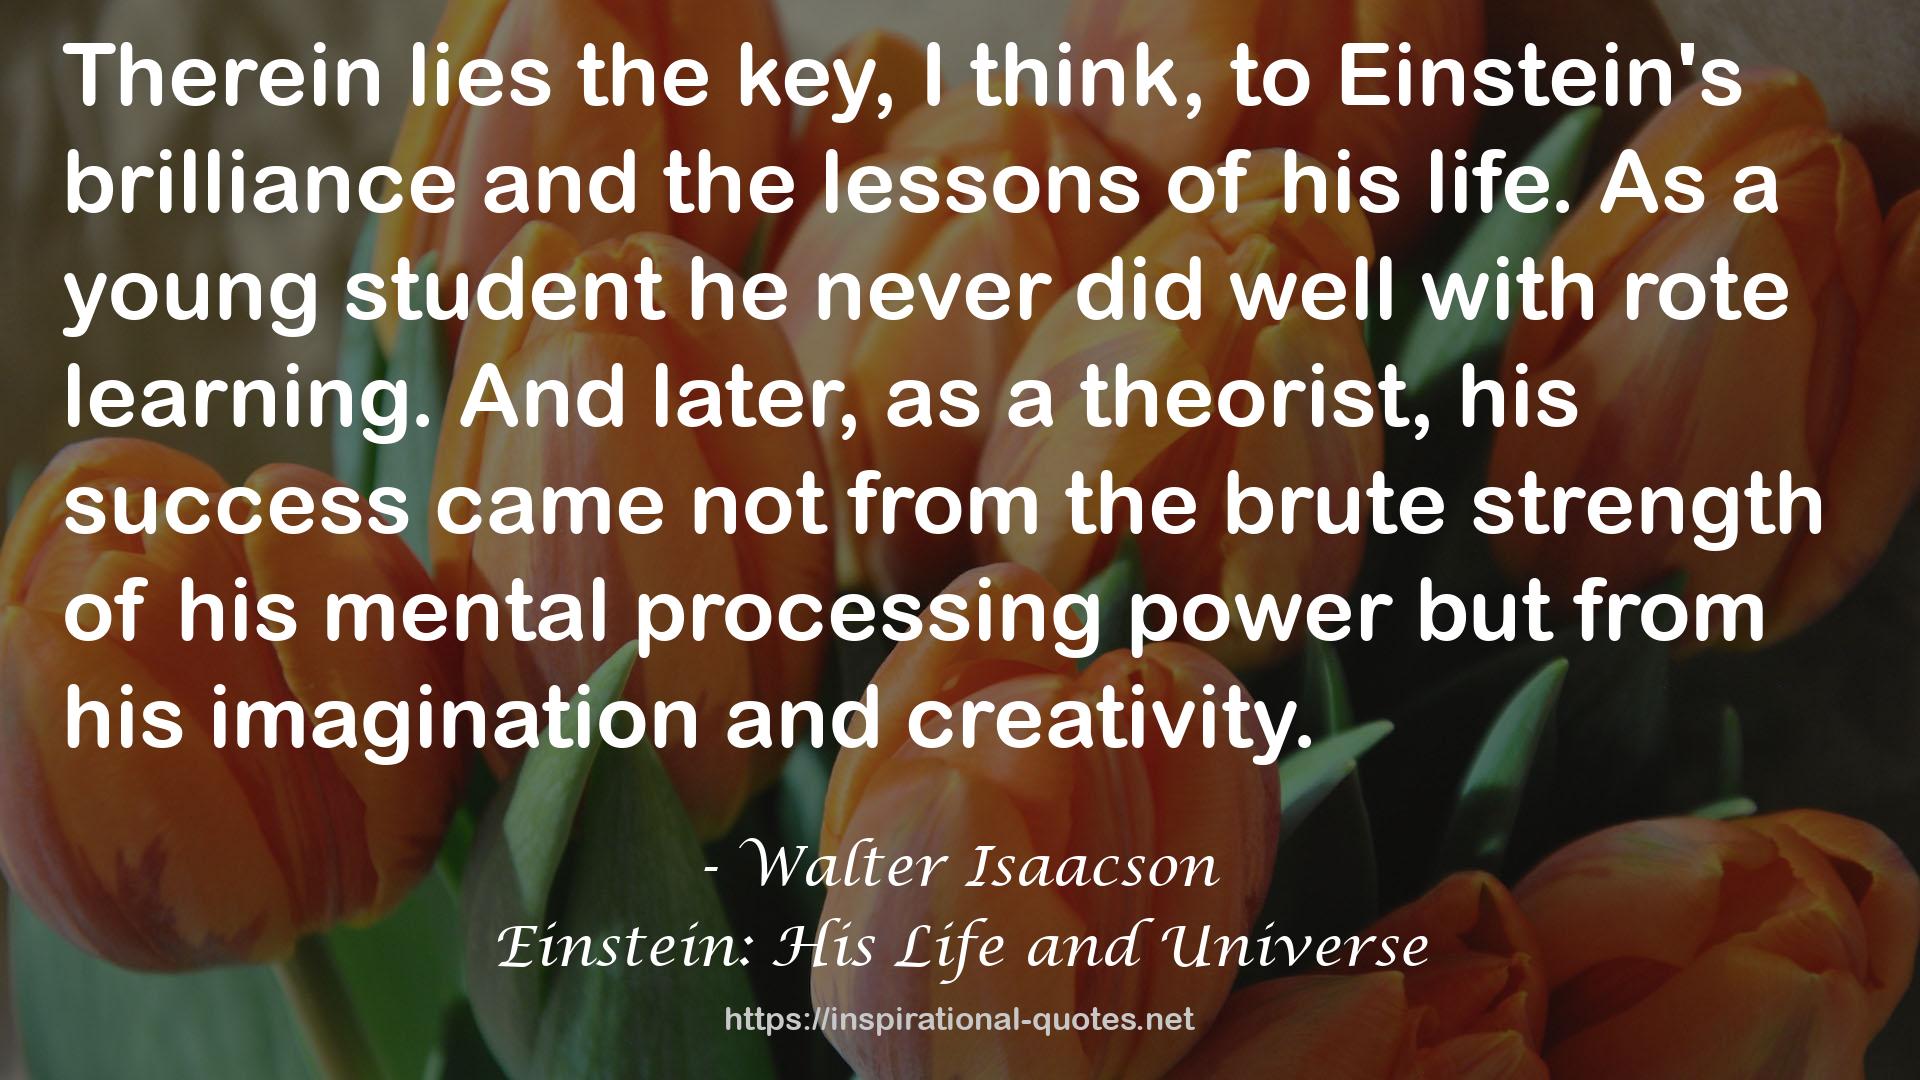 Einstein: His Life and Universe QUOTES